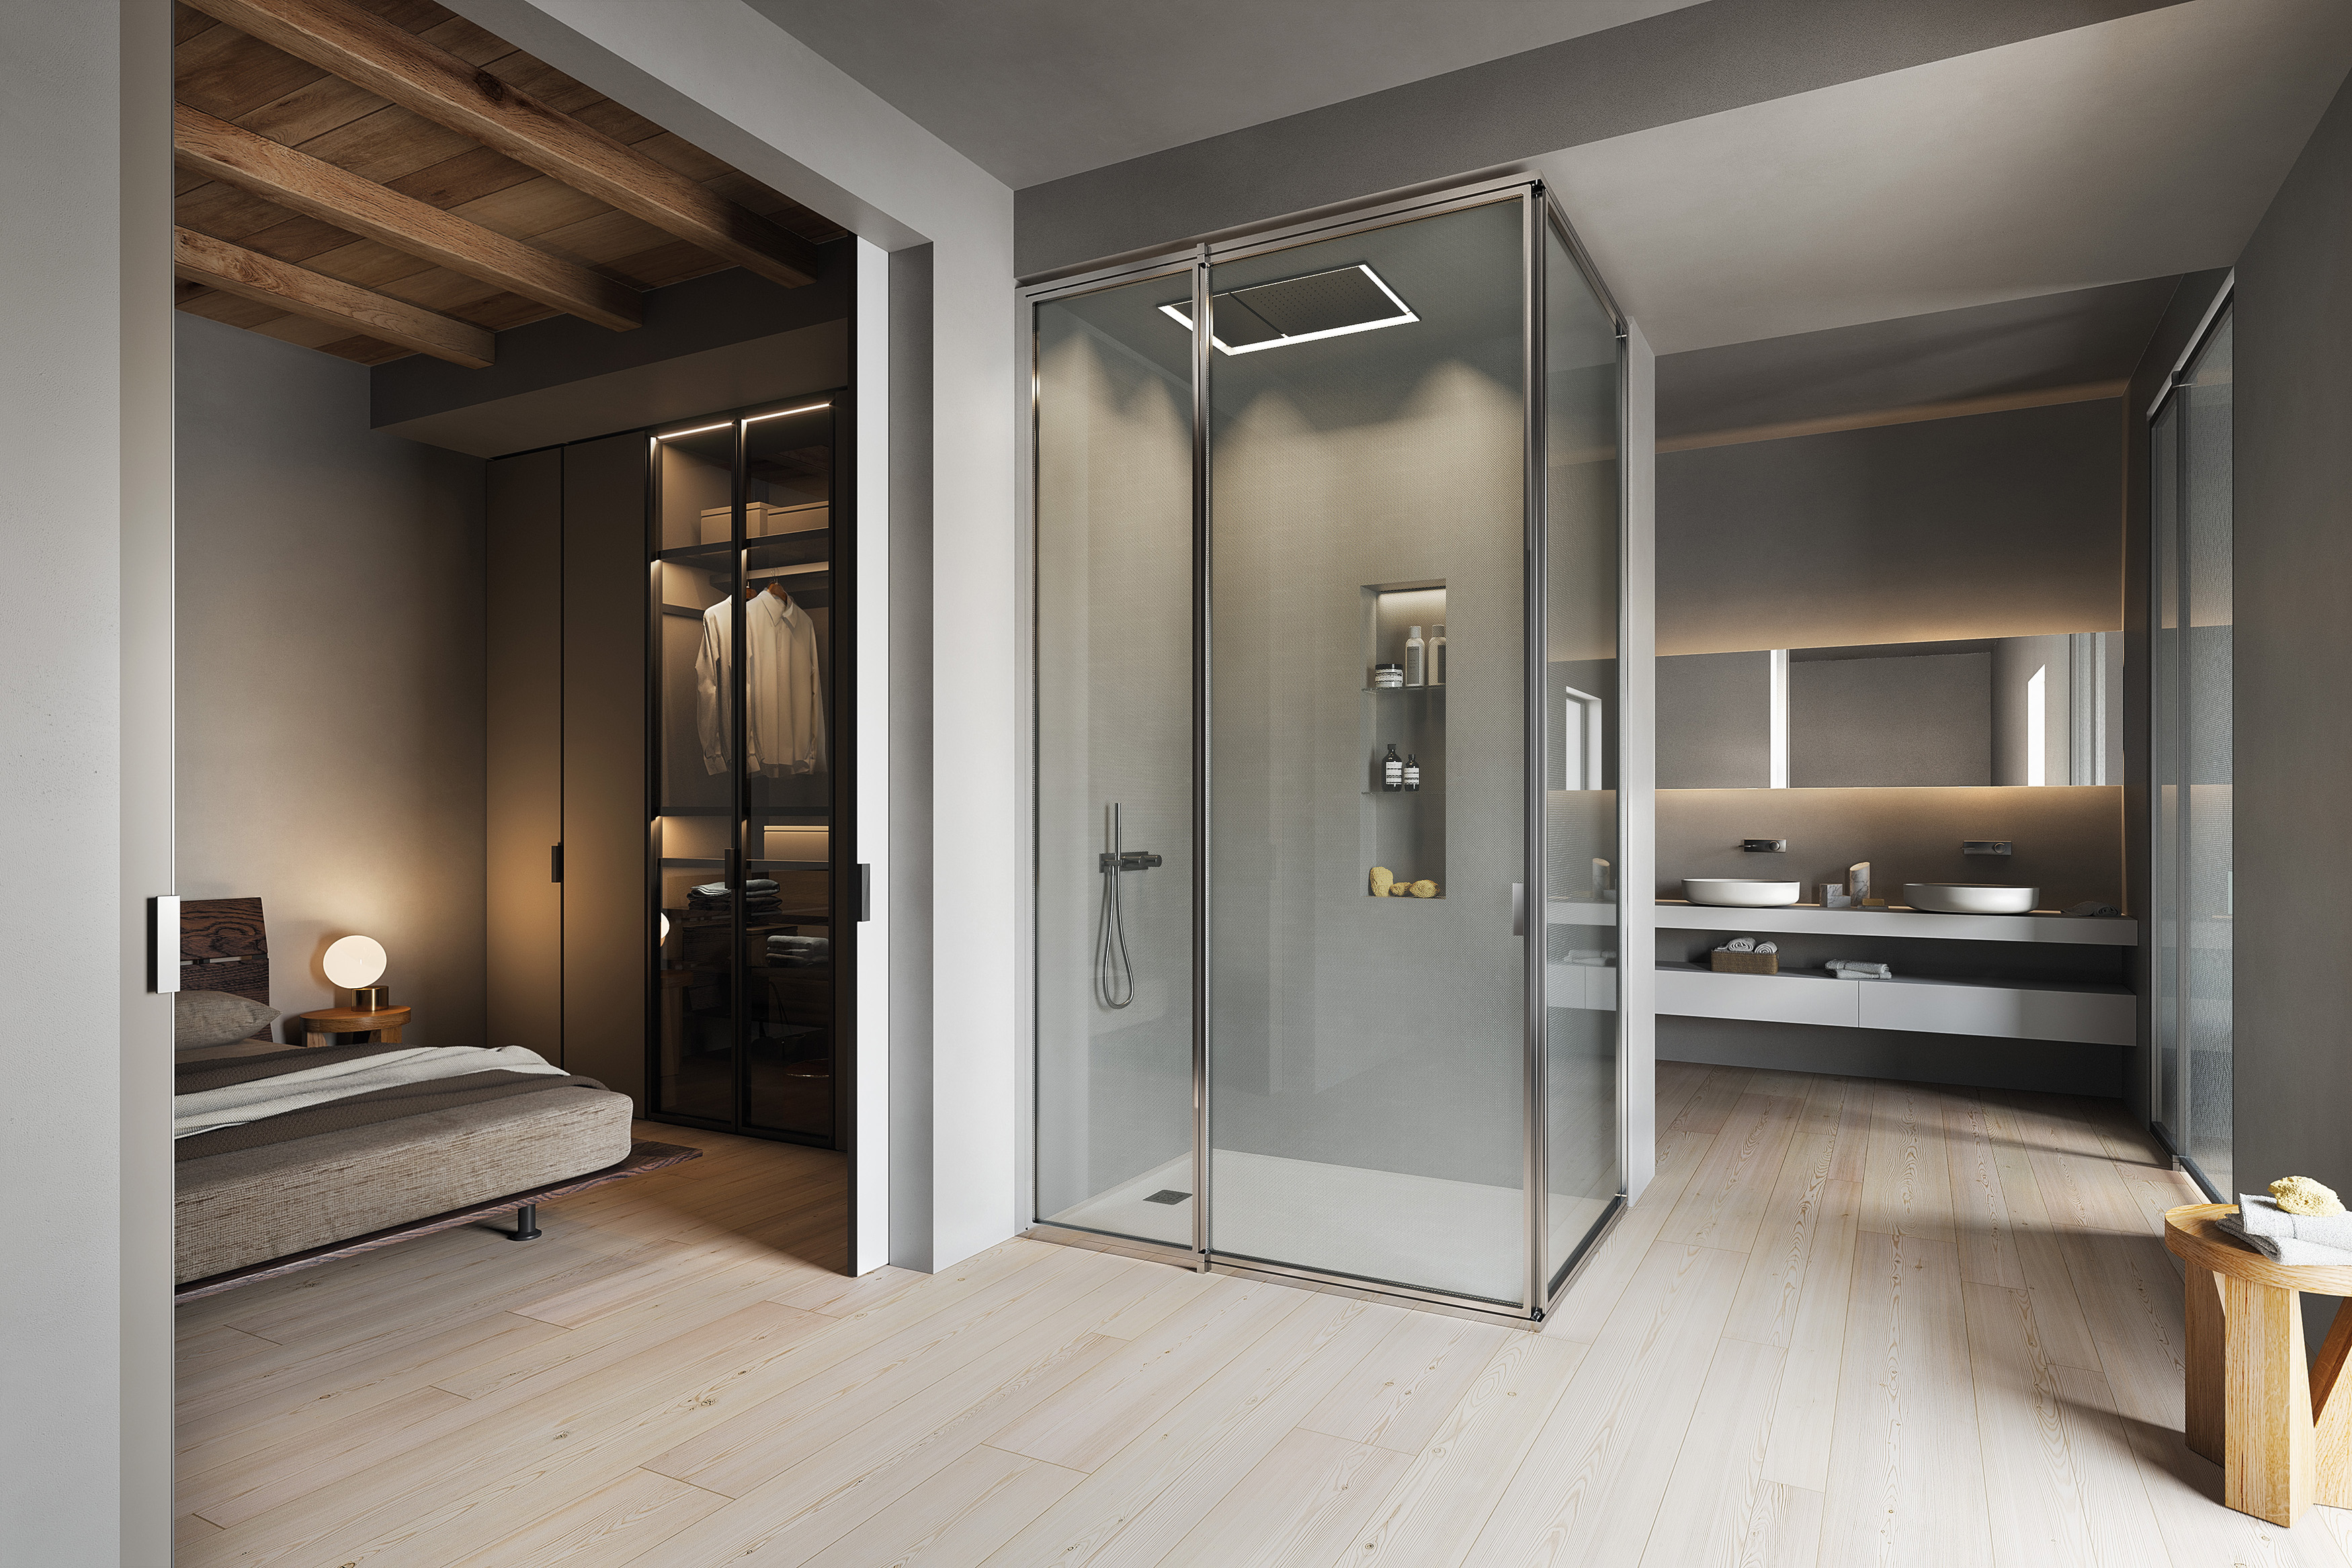 In this set-up, the separate shower enclosure and fixtures area are enclosed by matching elements